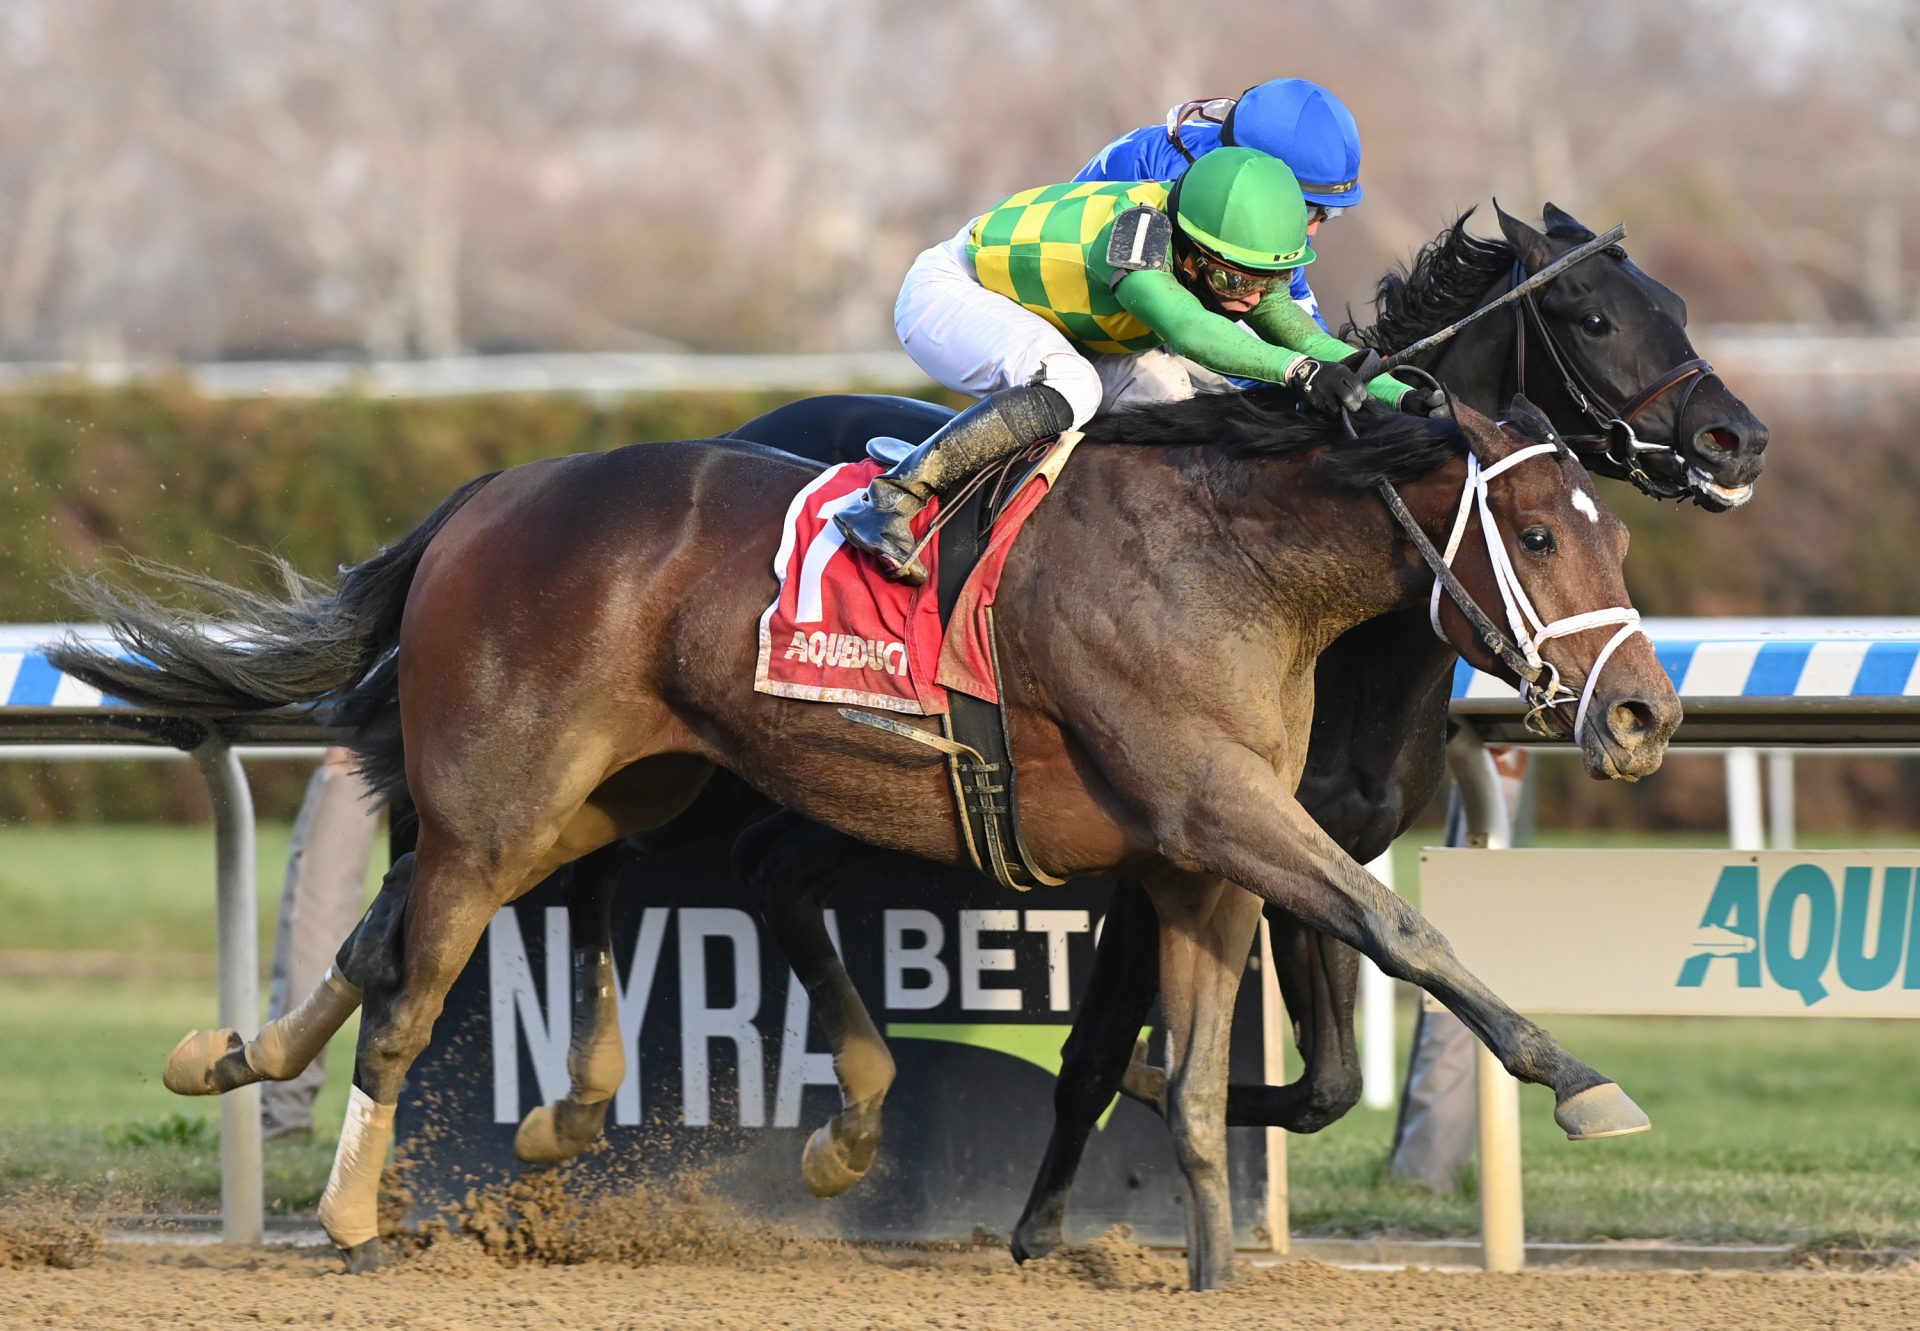 Mo Donegal (Uncle Mo) winning the Gr.2 Remsen at Aqueduct